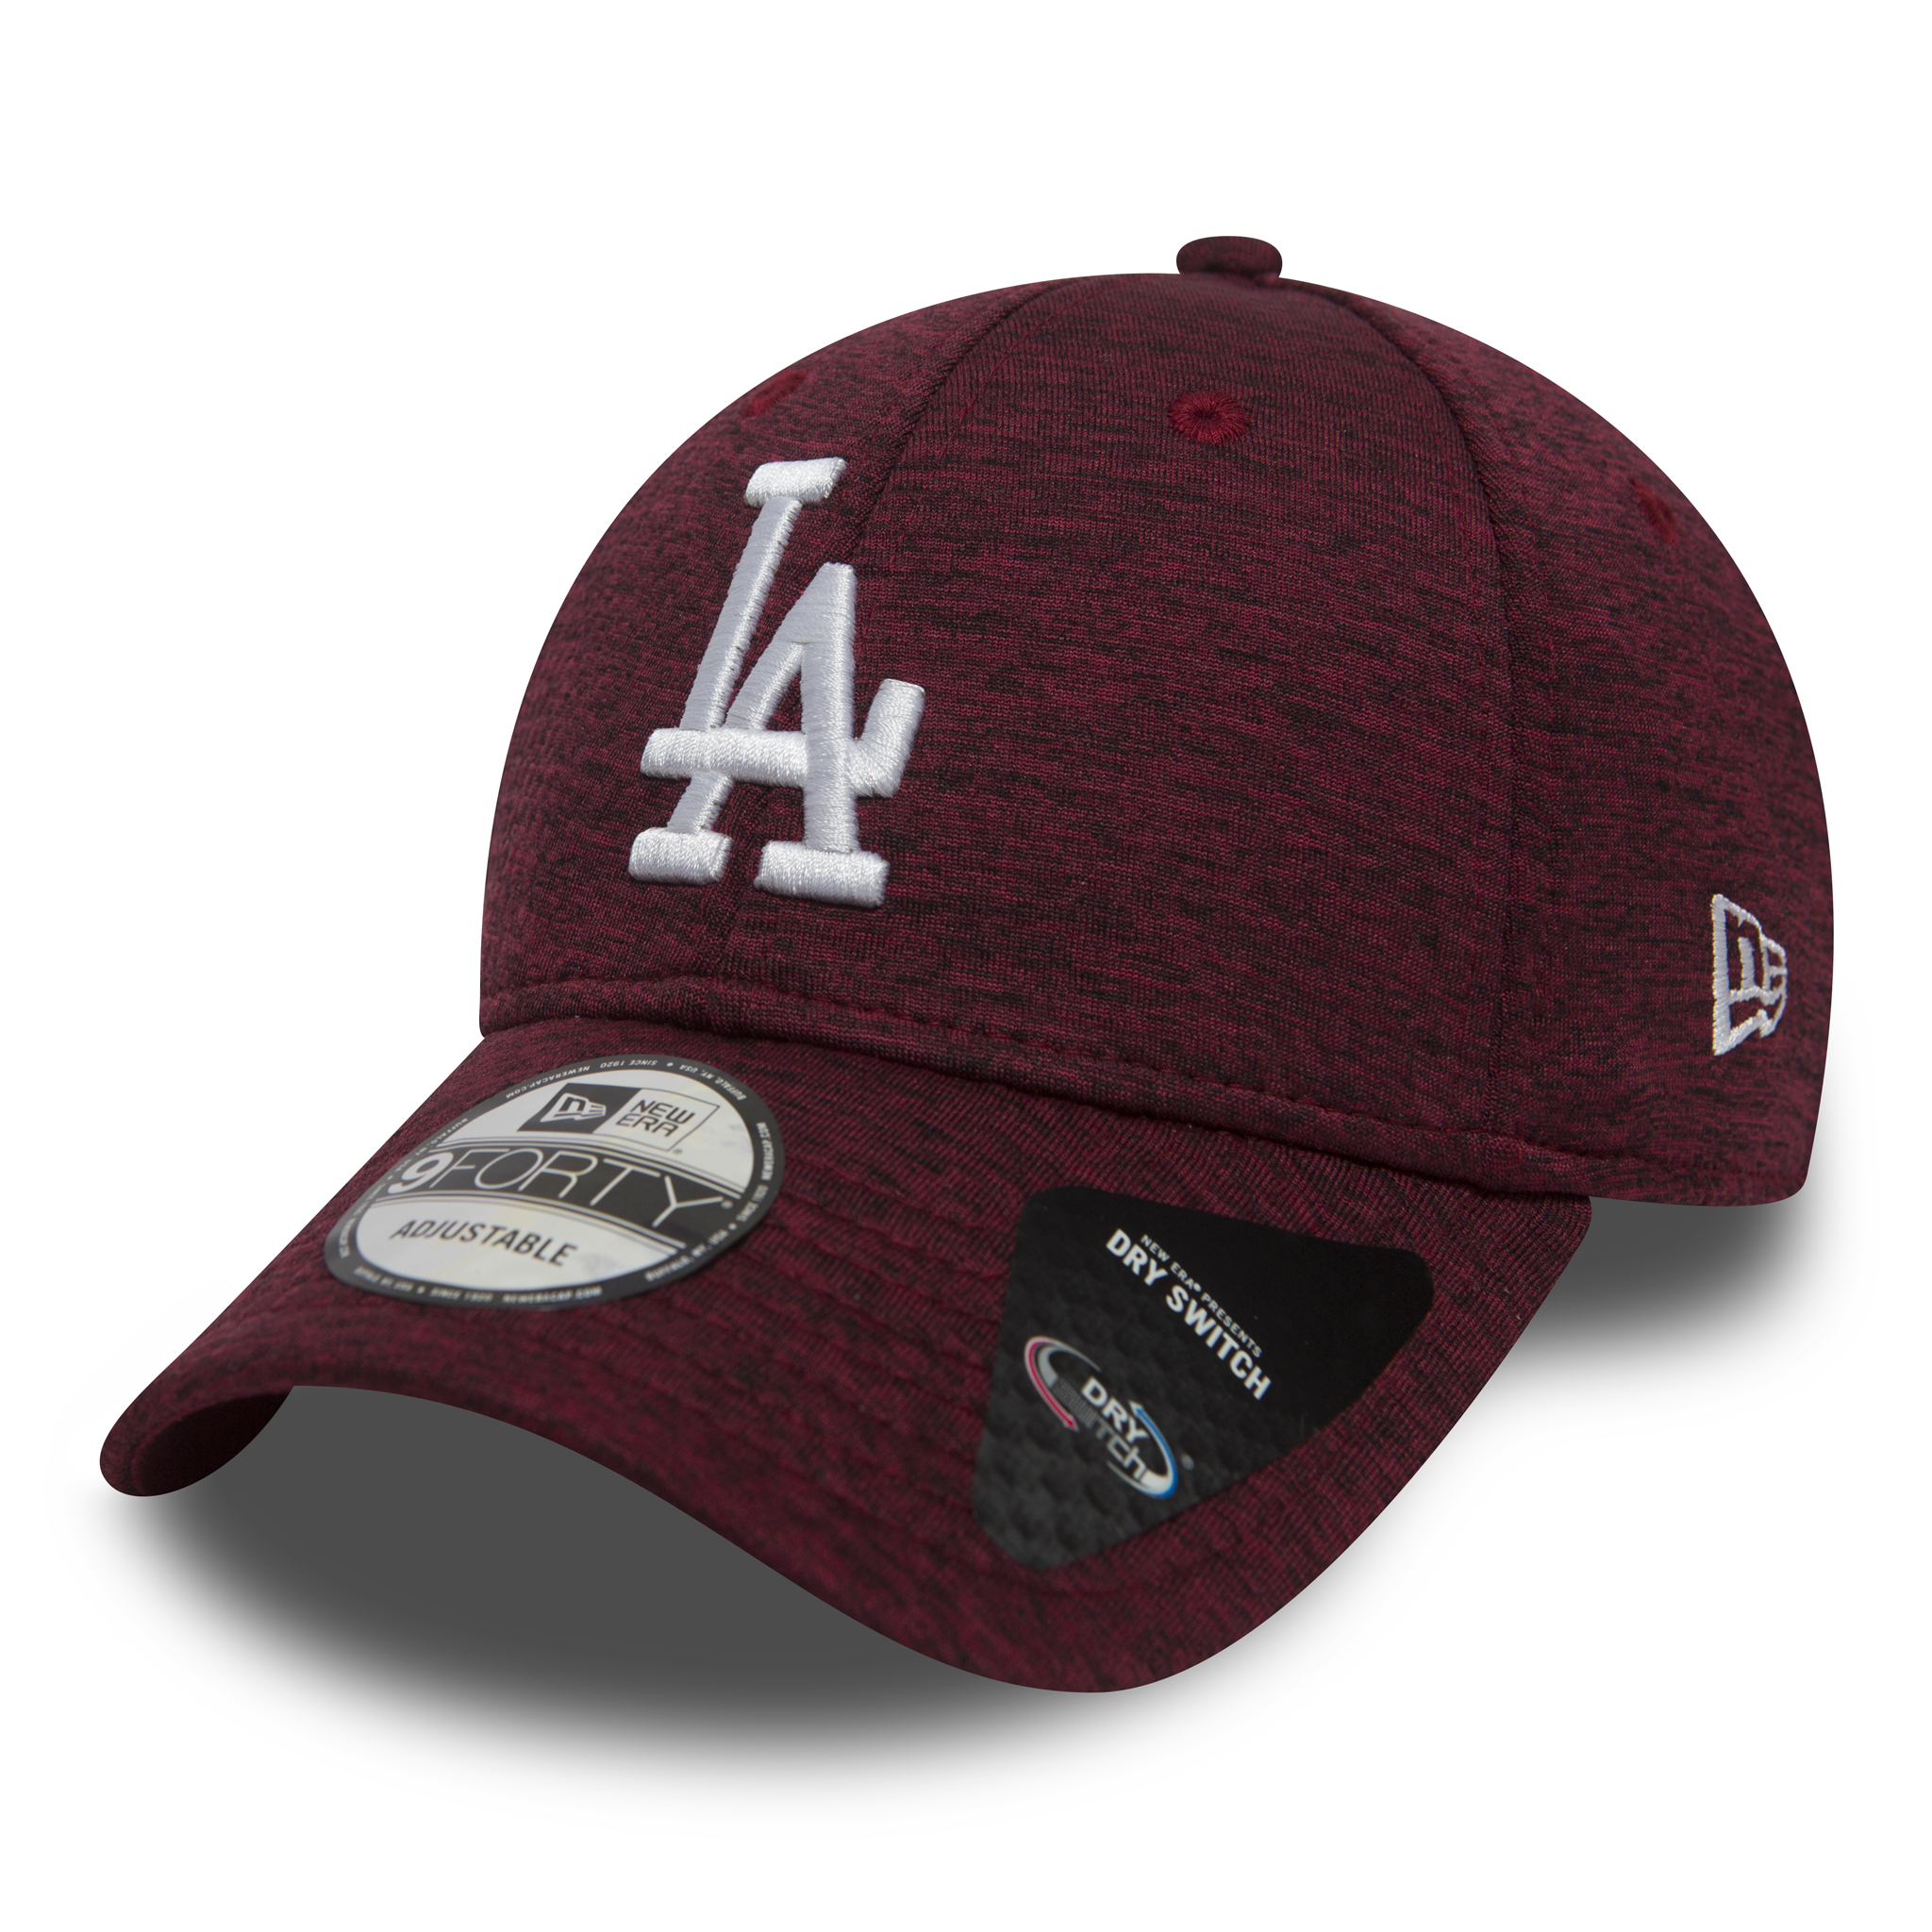 Gorra Los Angeles Dodgers 9FORTY, cardinal